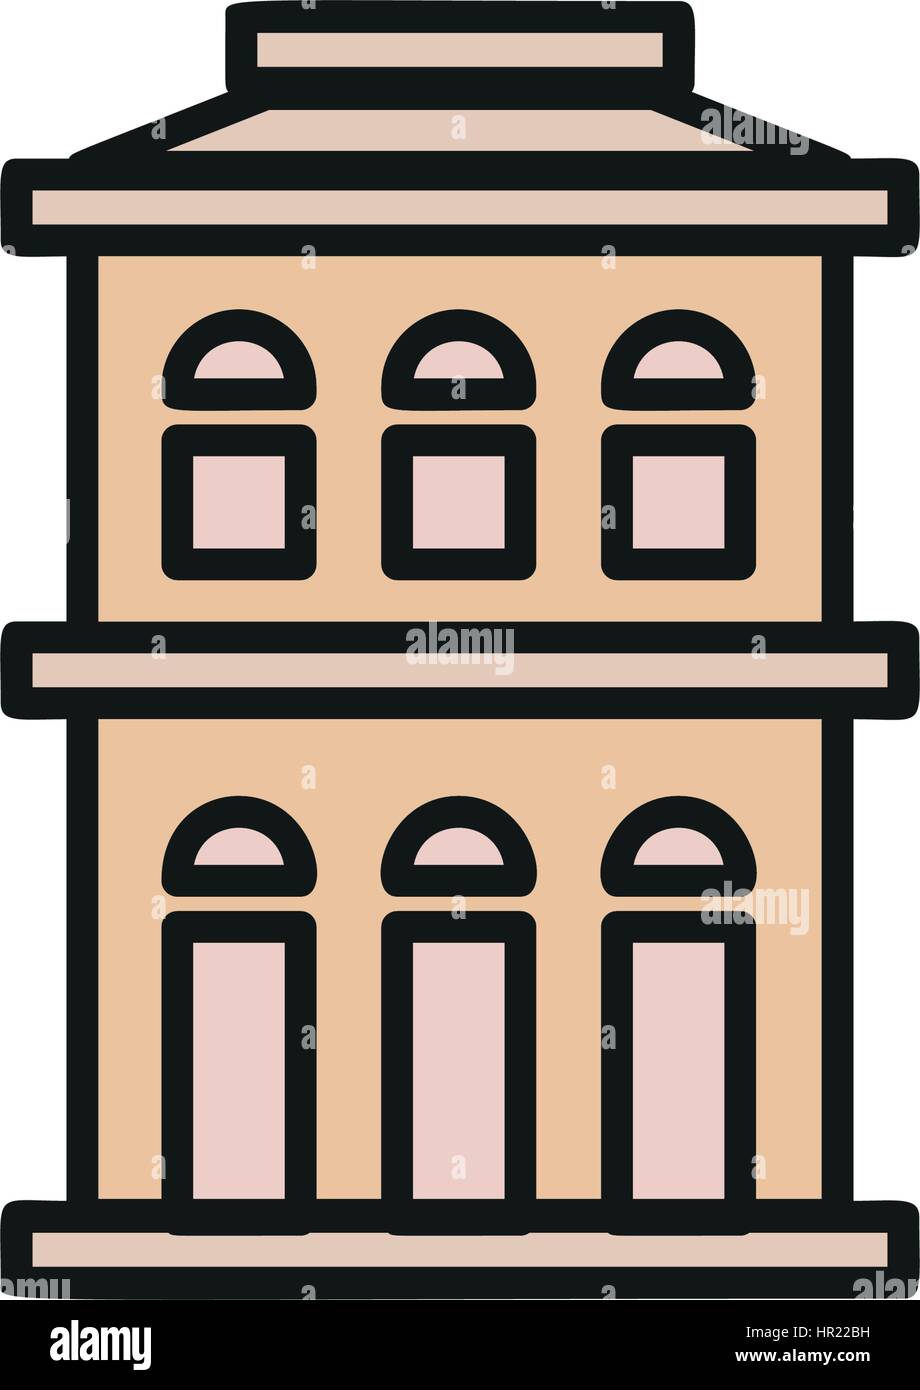 Isolated pink color low-rise municipal house in lineart style icon, element of urban architectural building vector illustration. Stock Vector